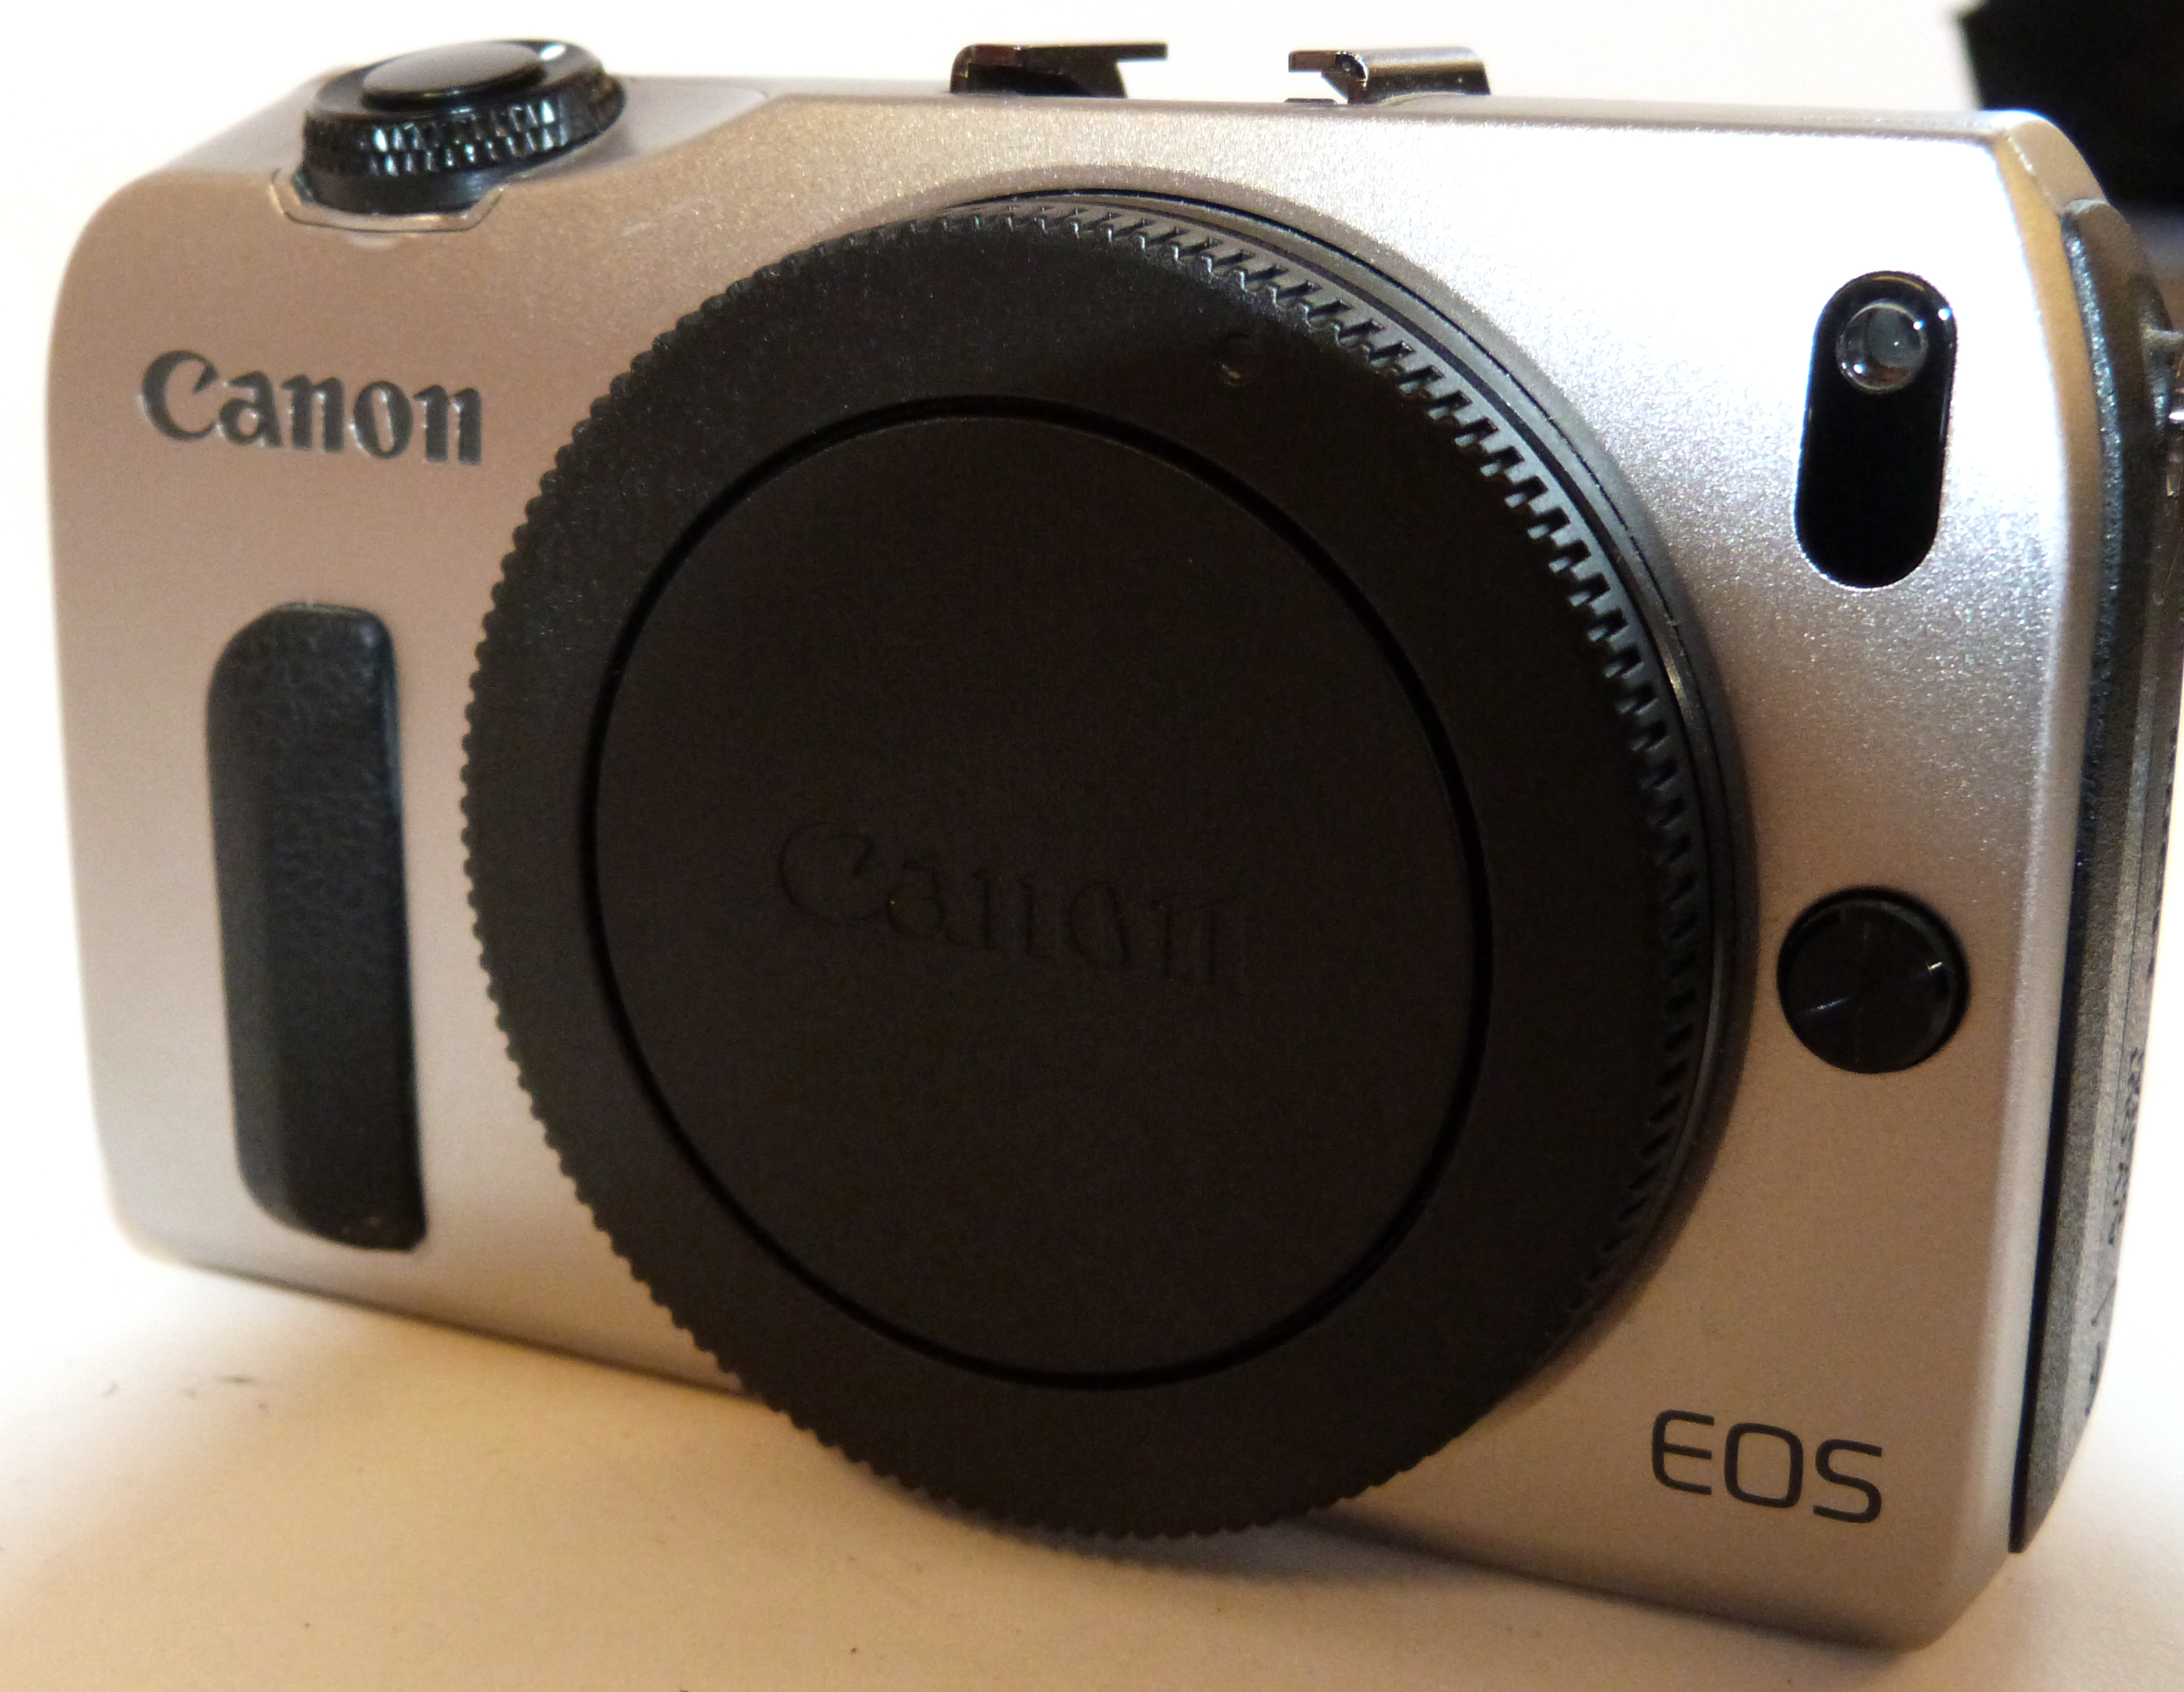 Canon EOS M digital camera with Canon zoom lens EF-M 18-55mm plus box and accessories - Image 2 of 4